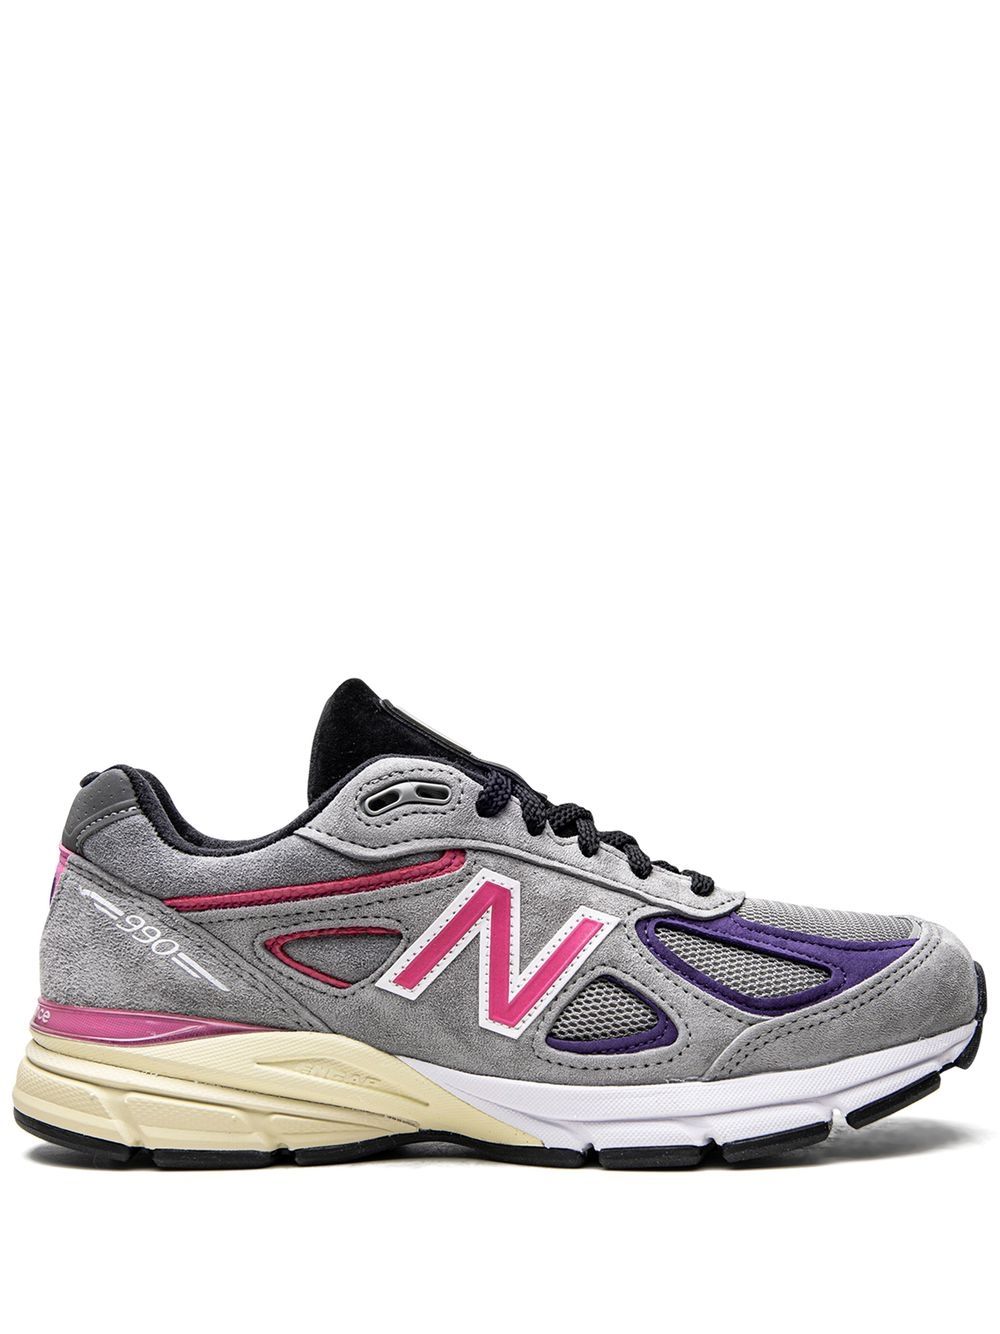 New Balance x Kith x United Arrows and Sons 990v4 sneakers - Grey von New Balance